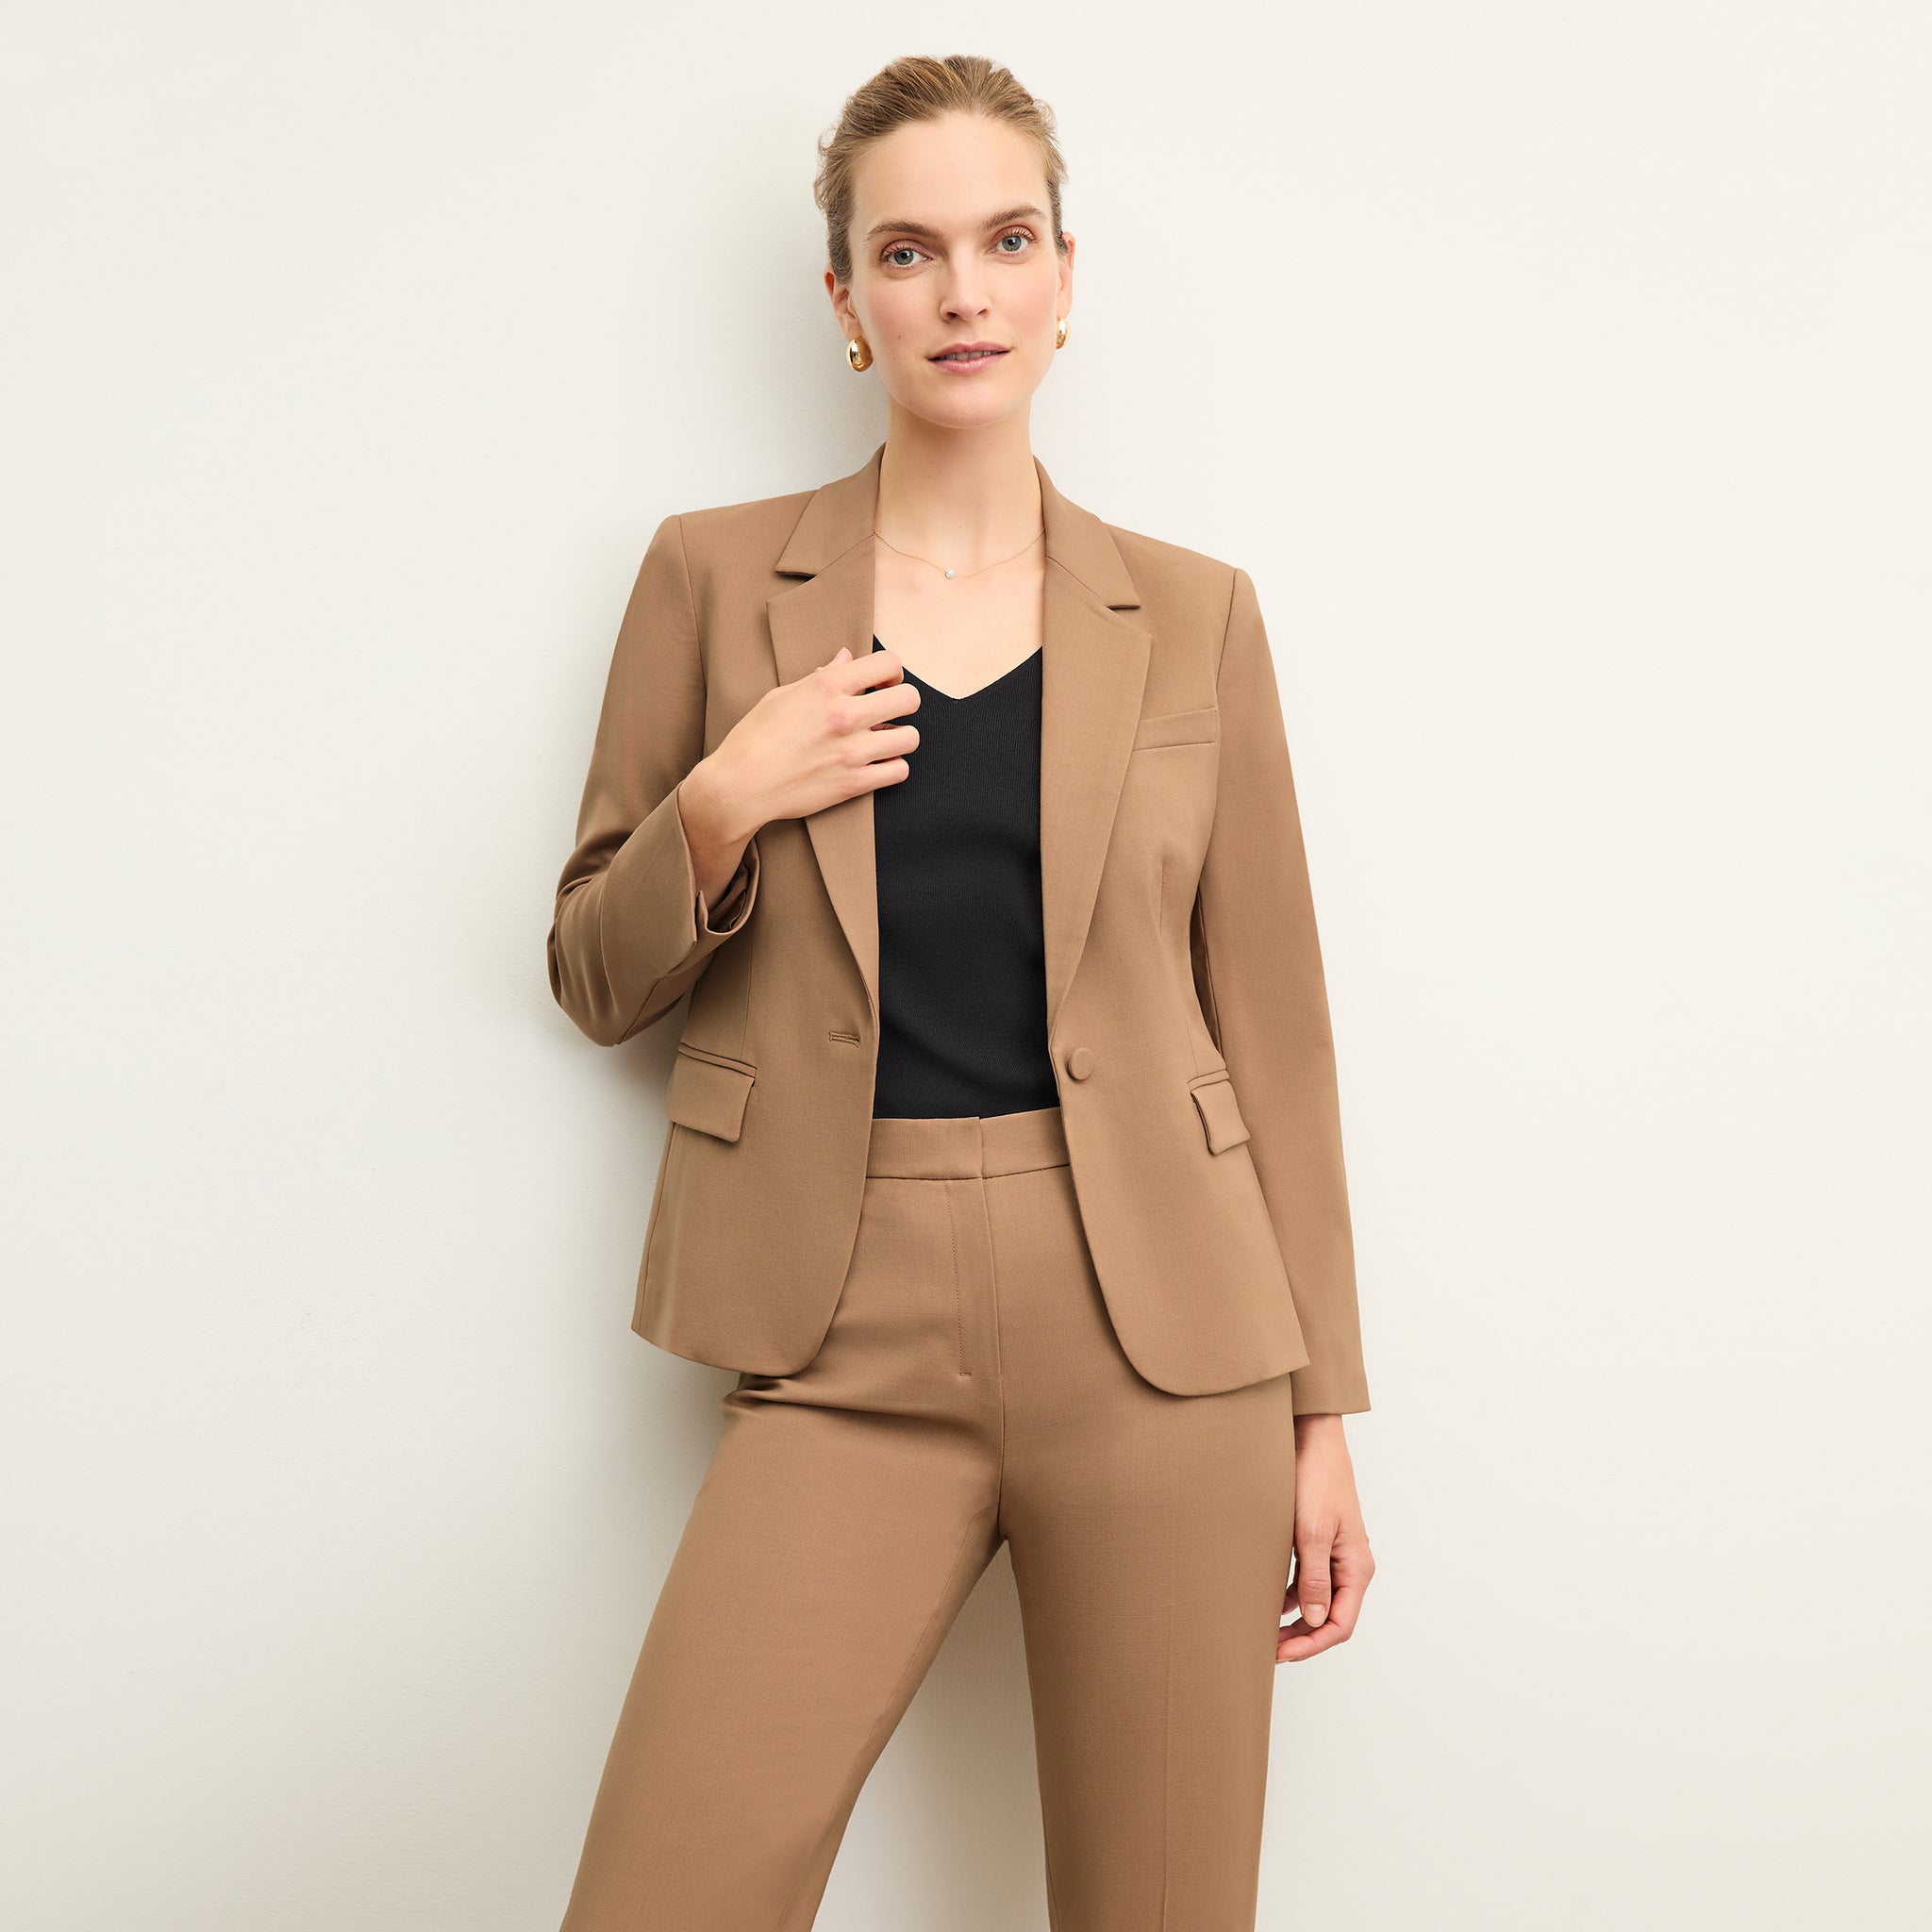 Classic in Camel // Wide leg pants for petites - Extra Petite  Spring work  outfits, Fashionable work outfit, Professional work outfit